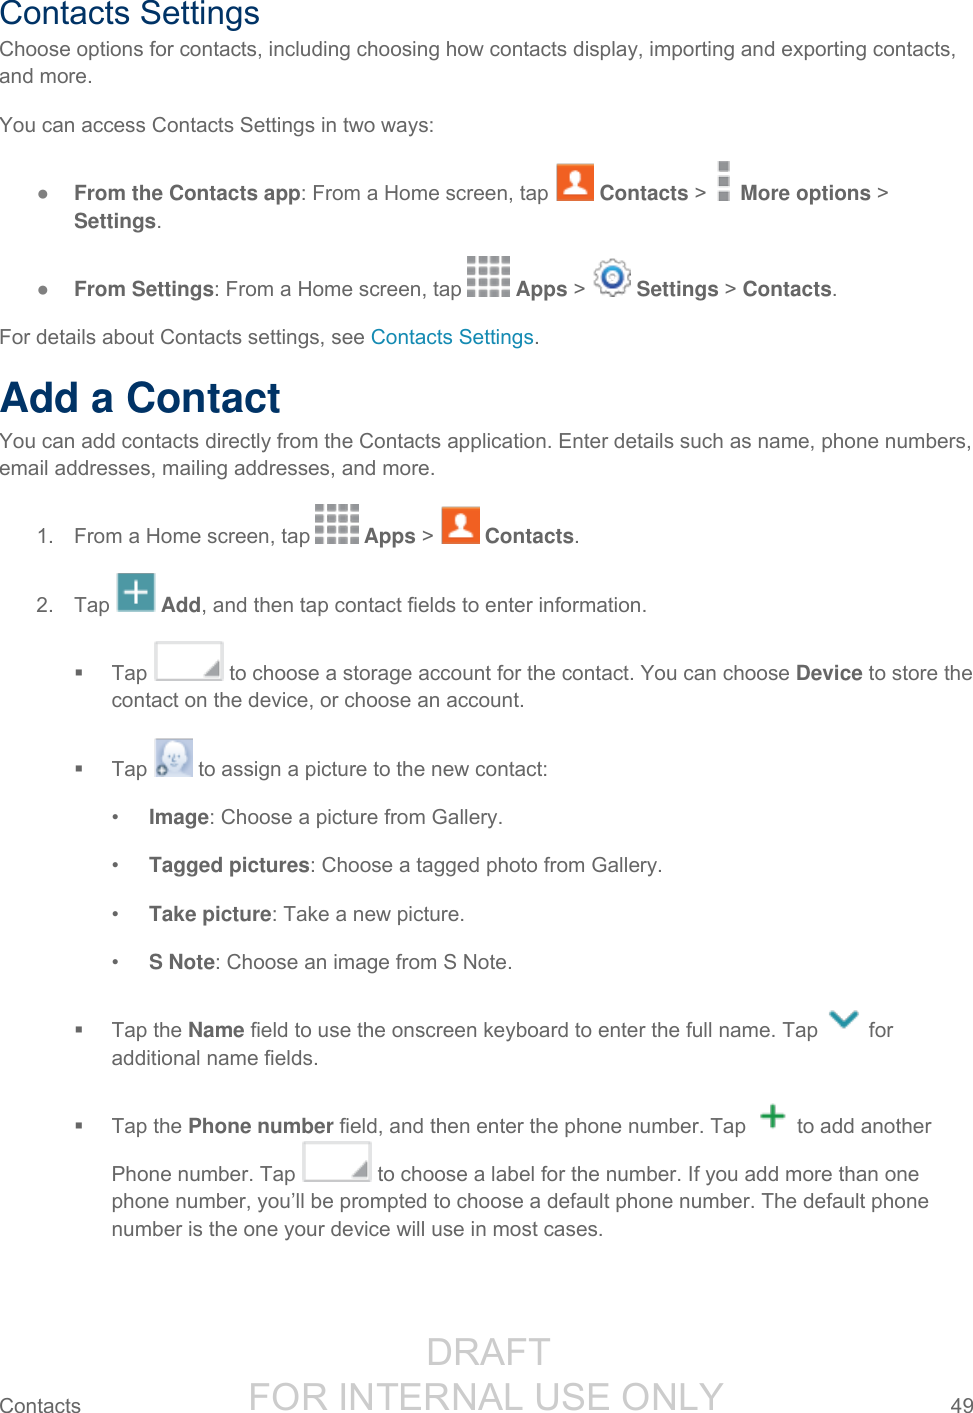                  DRAFT FOR INTERNAL USE ONLY Contacts  49   Contacts Settings Choose options for contacts, including choosing how contacts display, importing and exporting contacts, and more. You can access Contacts Settings in two ways: ● From the Contacts app: From a Home screen, tap   Contacts &gt;   More options &gt; Settings. ● From Settings: From a Home screen, tap   Apps &gt;   Settings &gt; Contacts. For details about Contacts settings, see Contacts Settings. Add a Contact You can add contacts directly from the Contacts application. Enter details such as name, phone numbers, email addresses, mailing addresses, and more. 1.  From a Home screen, tap   Apps &gt;   Contacts. 2.  Tap   Add, and then tap contact fields to enter information.    Tap   to choose a storage account for the contact. You can choose Device to store the contact on the device, or choose an account.   Tap   to assign a picture to the new contact: • Image: Choose a picture from Gallery. • Tagged pictures: Choose a tagged photo from Gallery. • Take picture: Take a new picture. • S Note: Choose an image from S Note.   Tap the Name field to use the onscreen keyboard to enter the full name. Tap   for additional name fields.   Tap the Phone number field, and then enter the phone number. Tap   to add another Phone number. Tap   to choose a label for the number. If you add more than one phone number, you’ll be prompted to choose a default phone number. The default phone number is the one your device will use in most cases. 